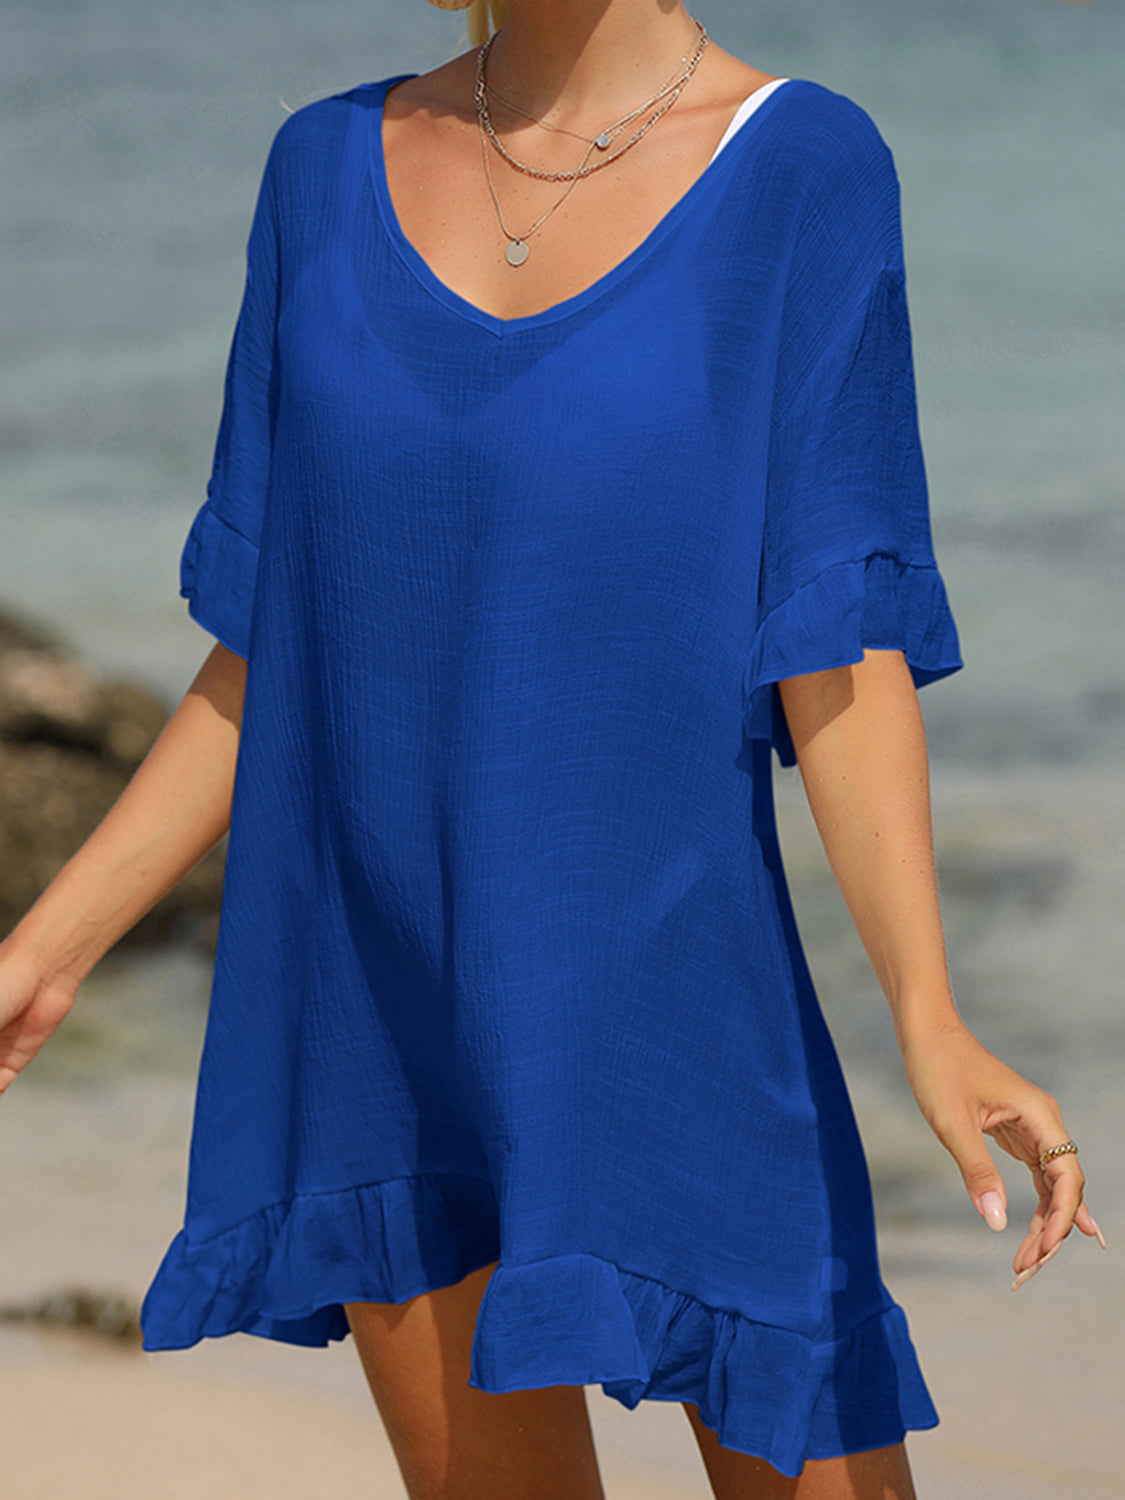 Dive Into Style:  Scoop Neck With Tie Back and Ruffle Sleeve Cover Up